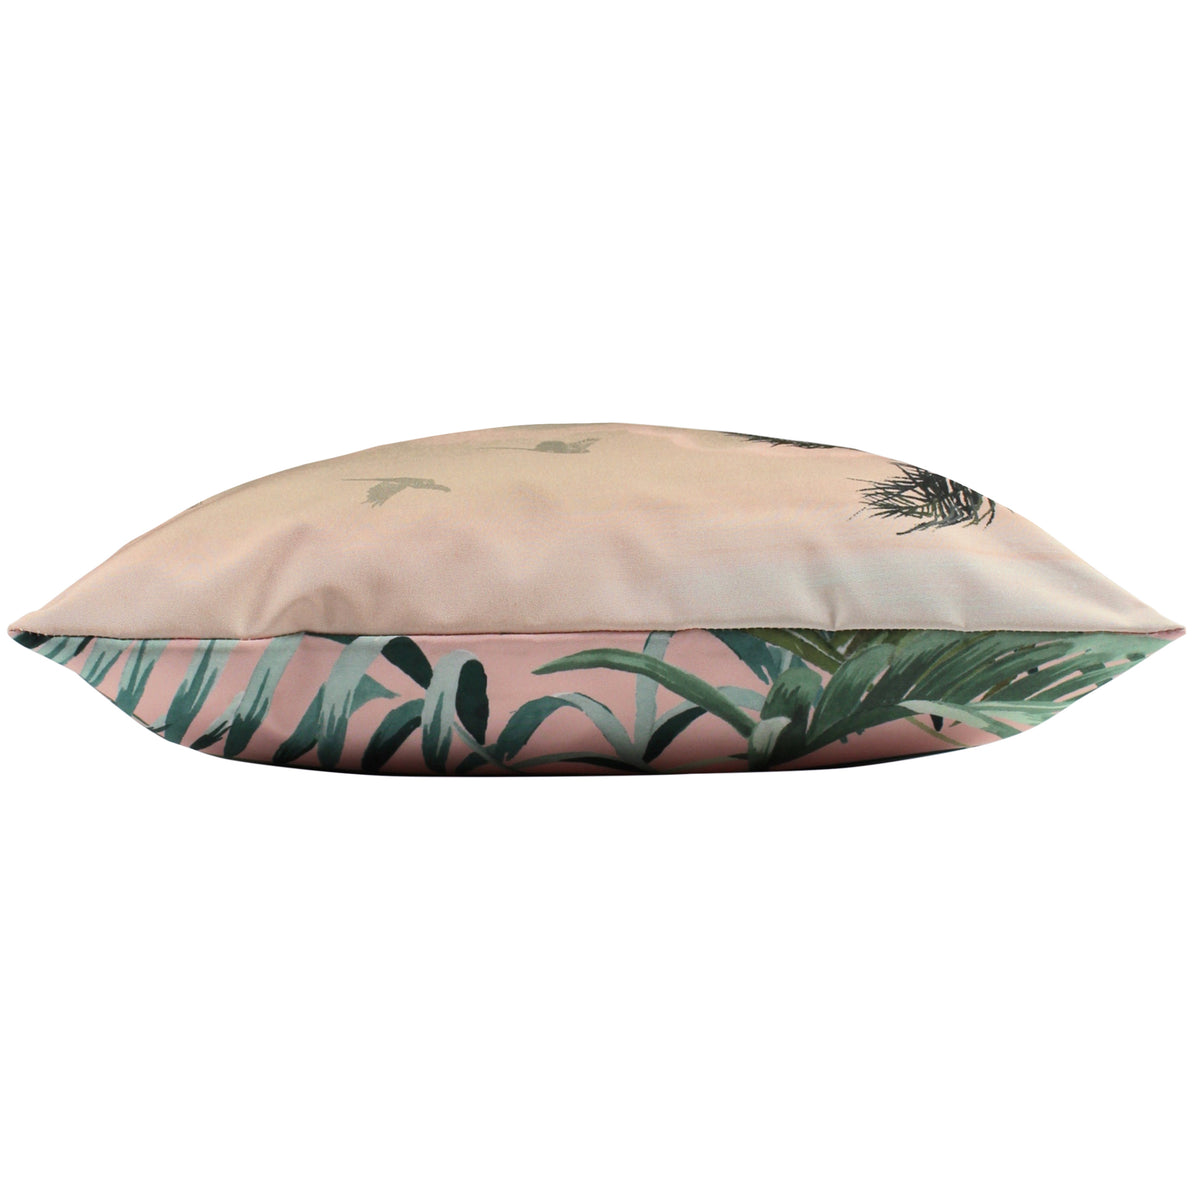 Jungle 43cm Reversible Outdoor Polyester Cushion